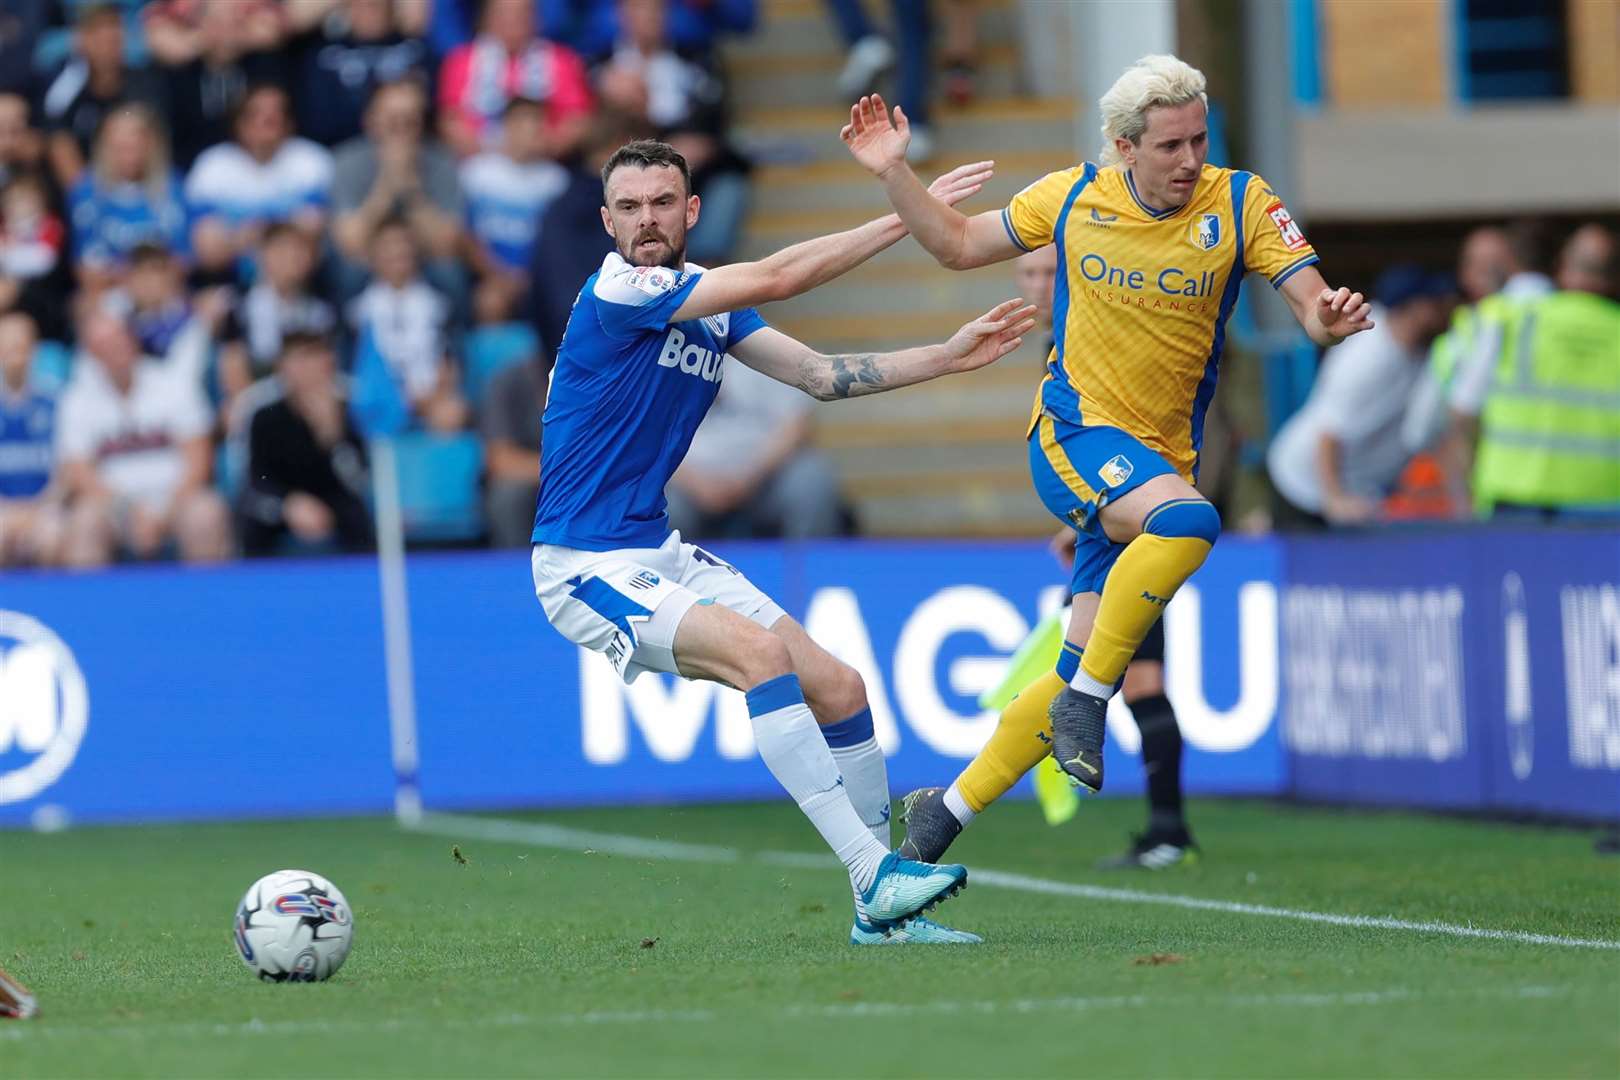 Scott Malone makes a challenge as the Gills take on Mansfield Picture: @Julian_KPI